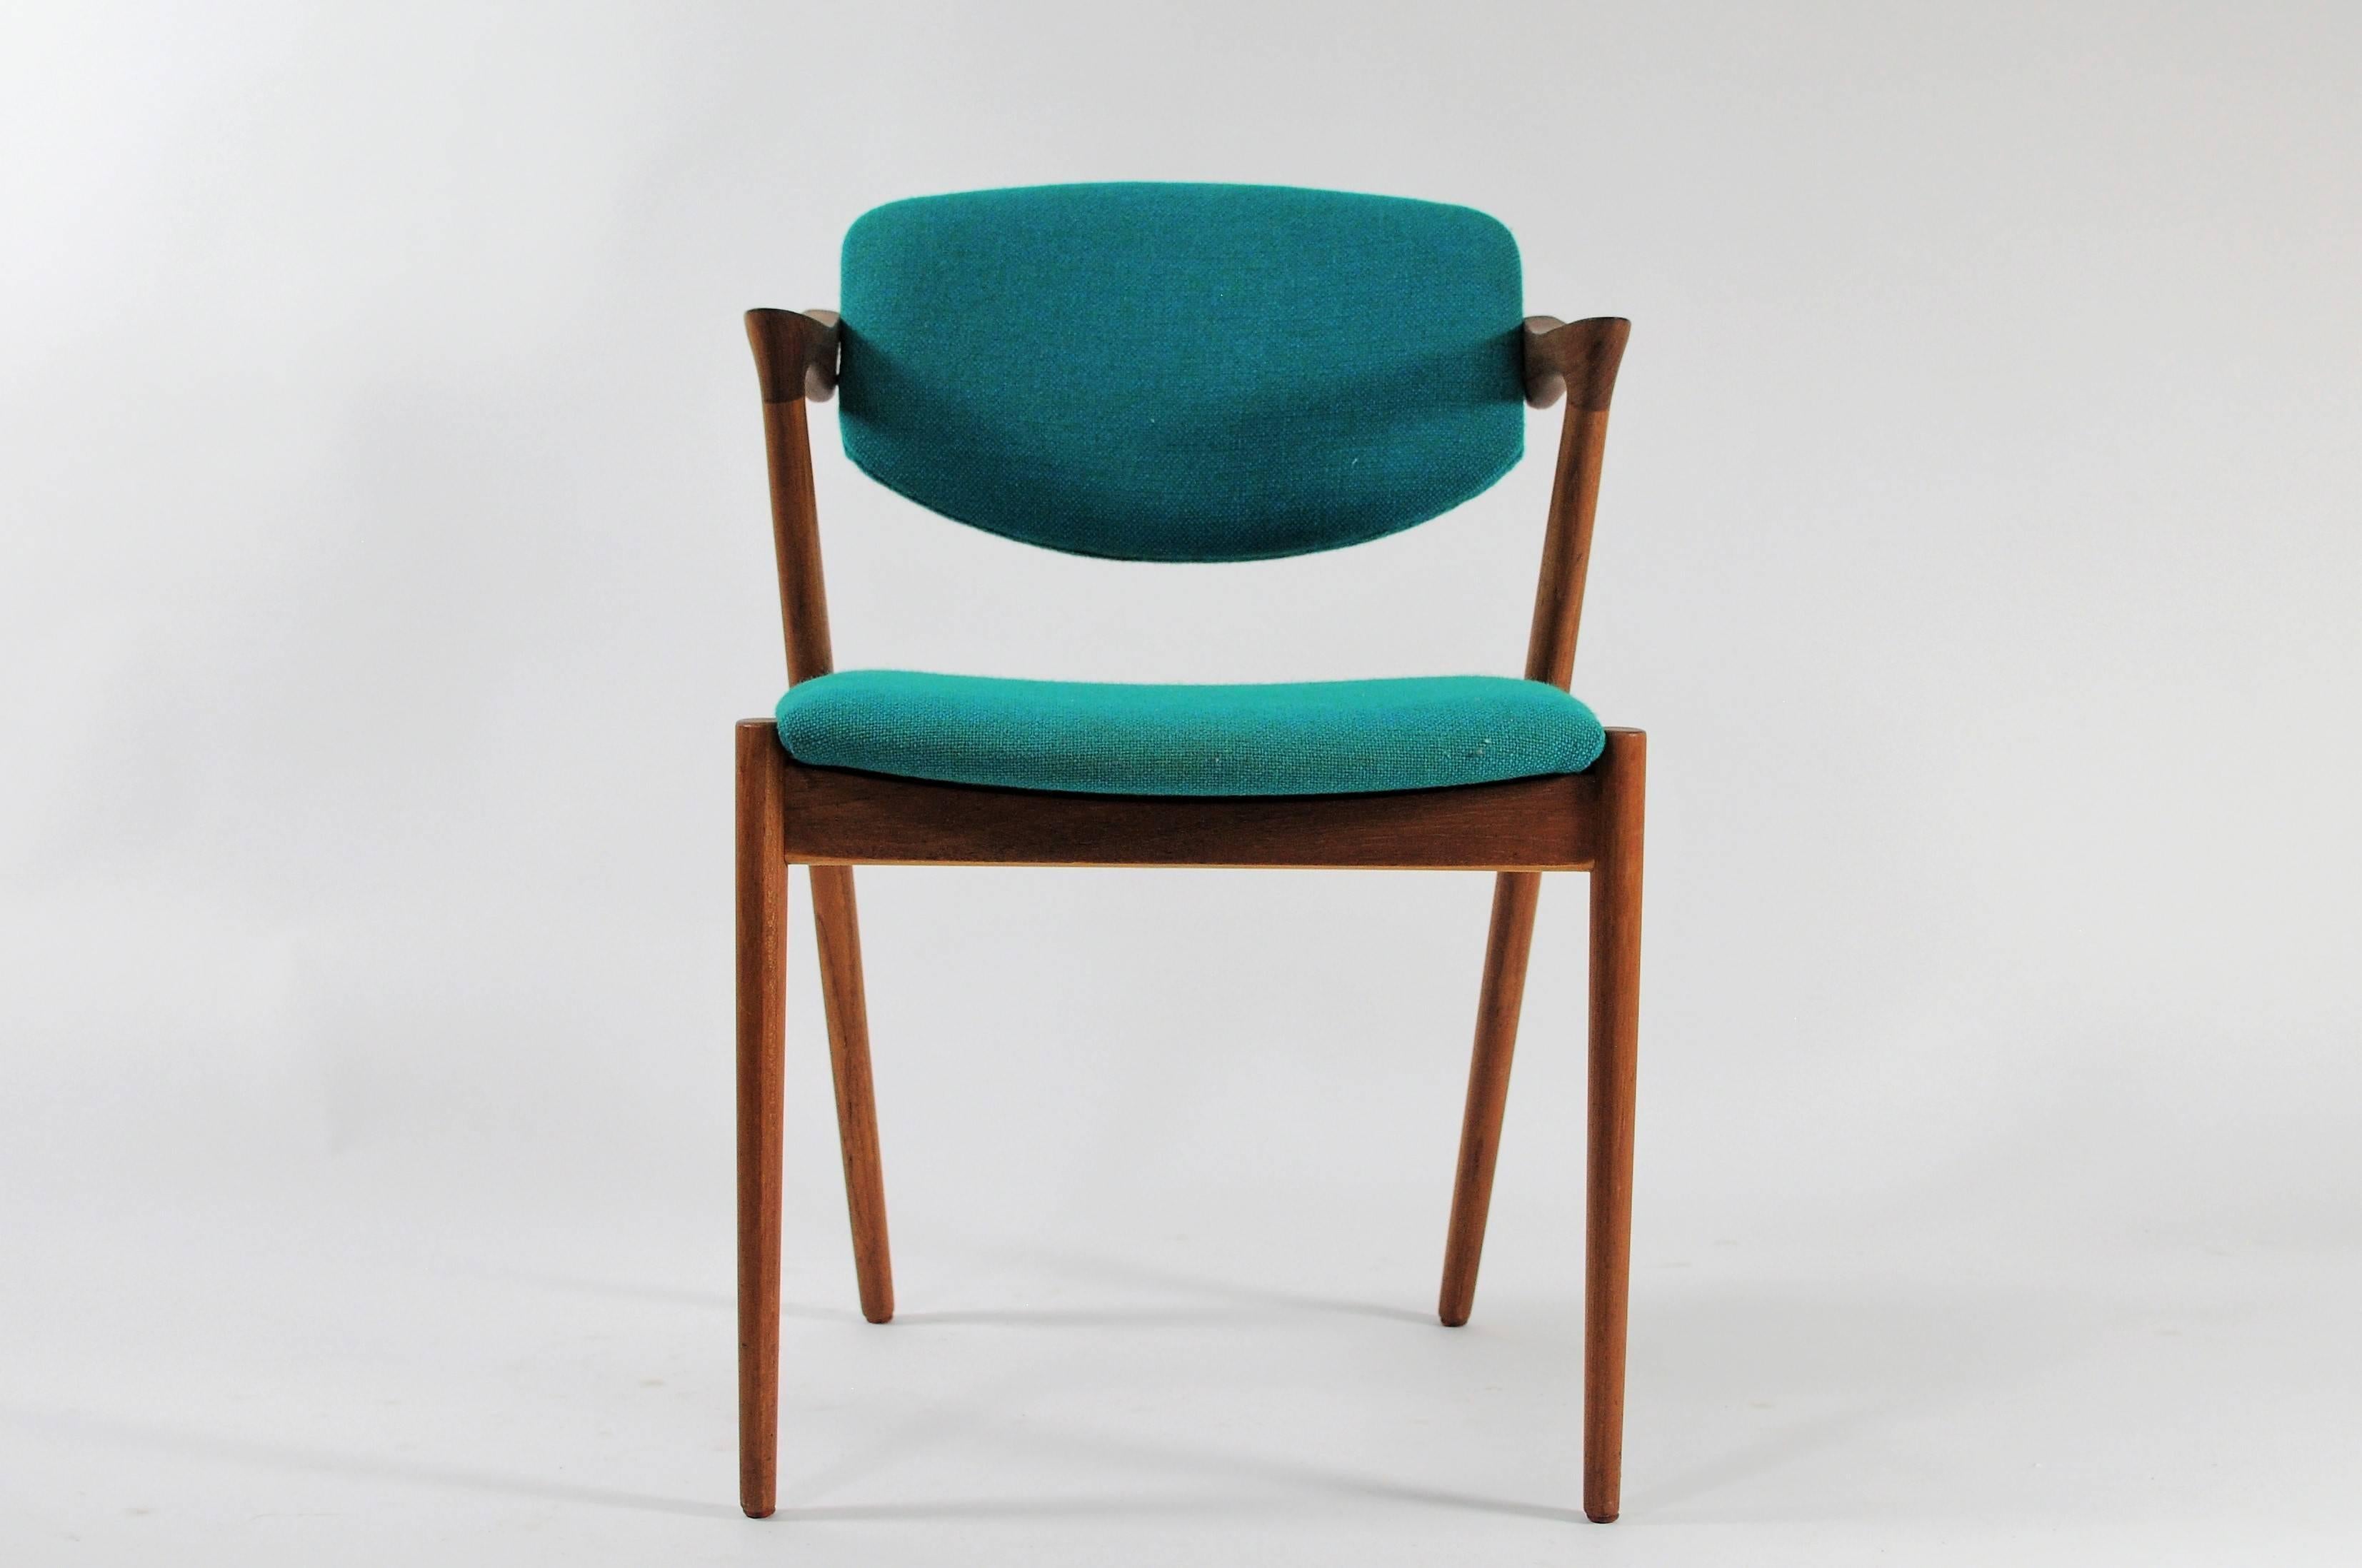 Set of 12 model 42 teak dining chairs with adjustable backrest by Kai Kristiansen for Schous Møbelfabrik.

The chairs have Kai Kristiansens typical light and elegant design that make them fit in easily where you want them in your home - a design